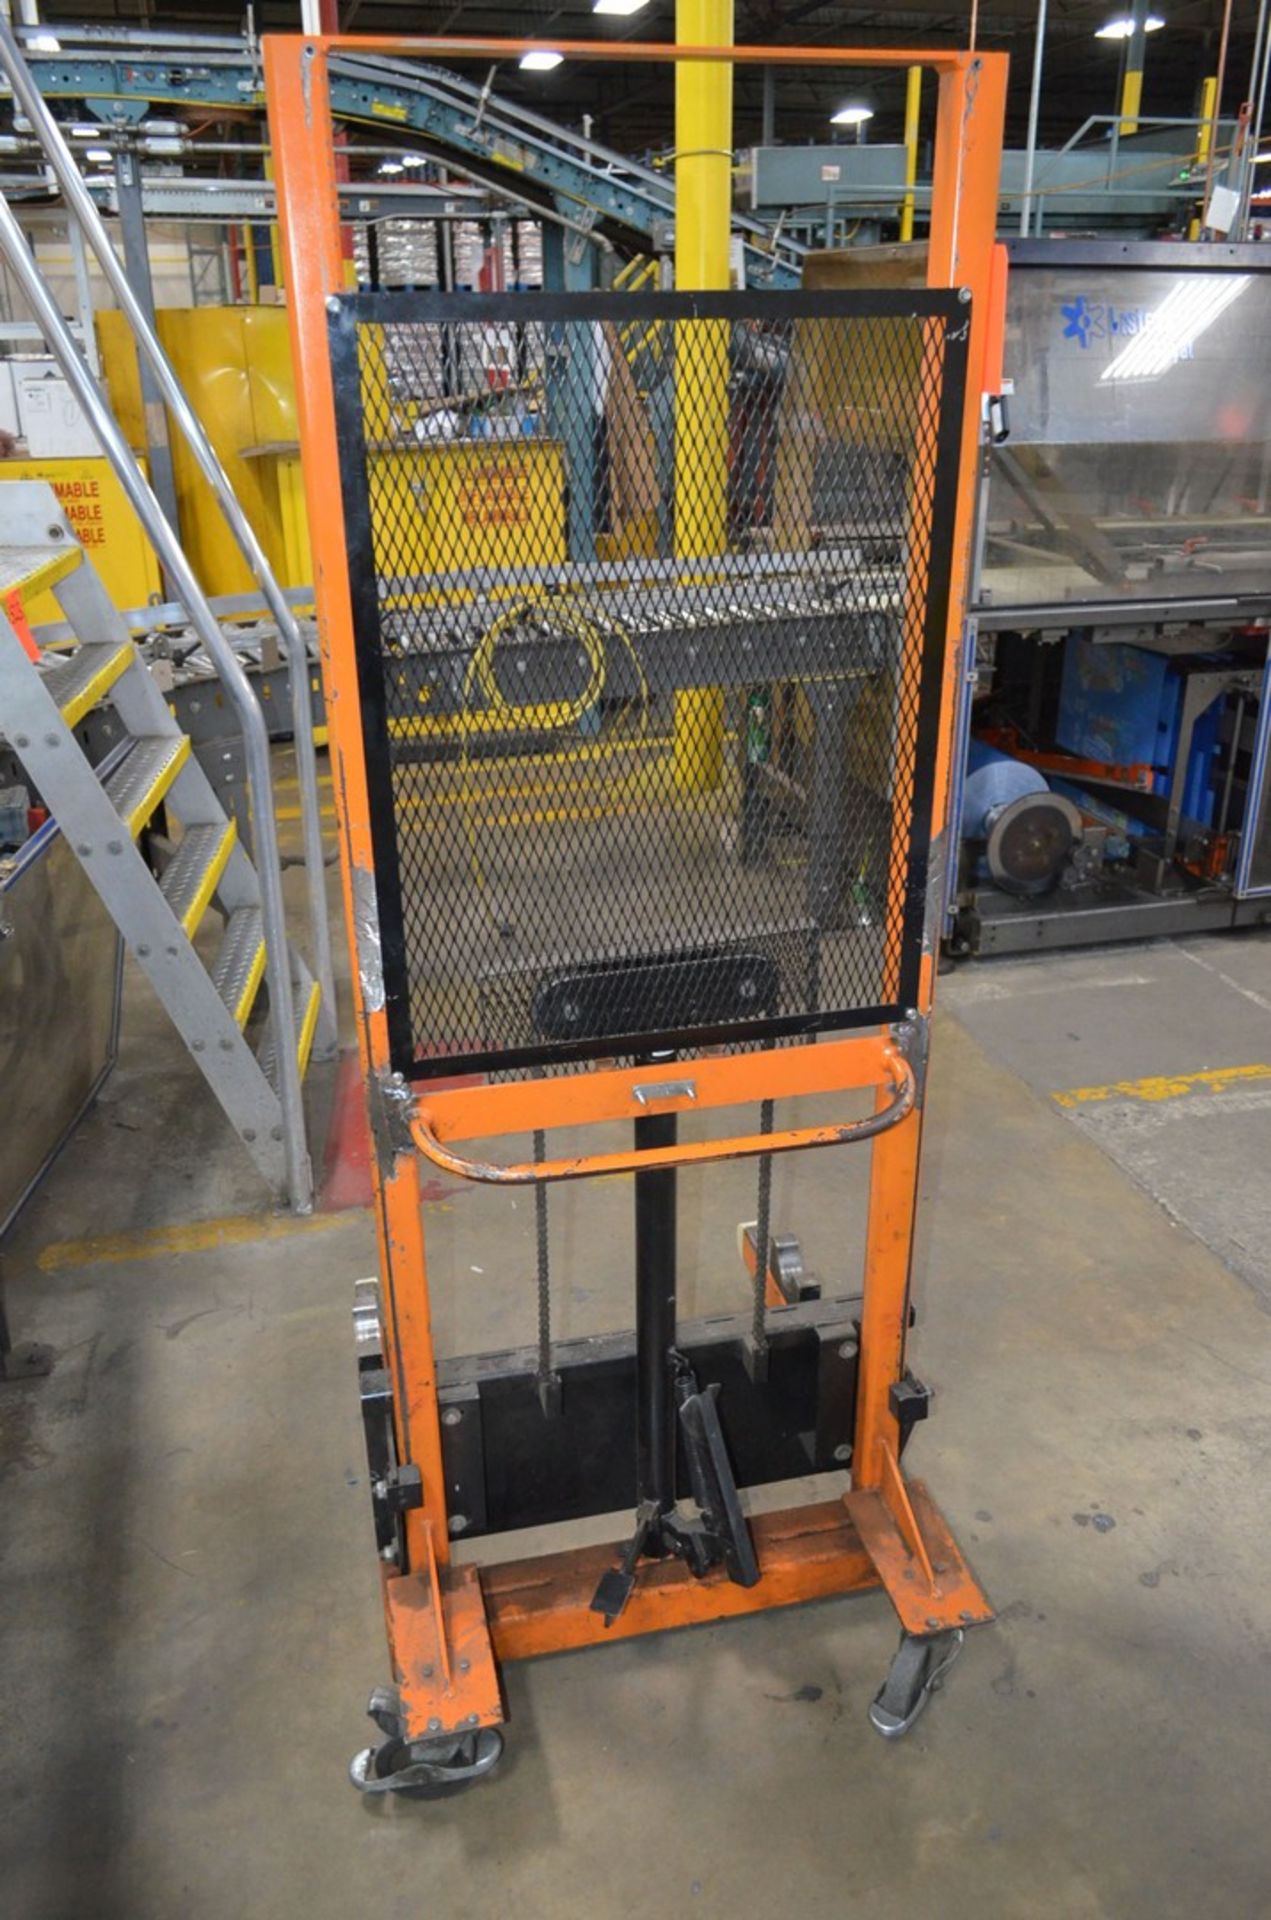 Hydraulic Lift Cart Location in Plant: 800 Milik Street, Warehouse Area - Image 3 of 4